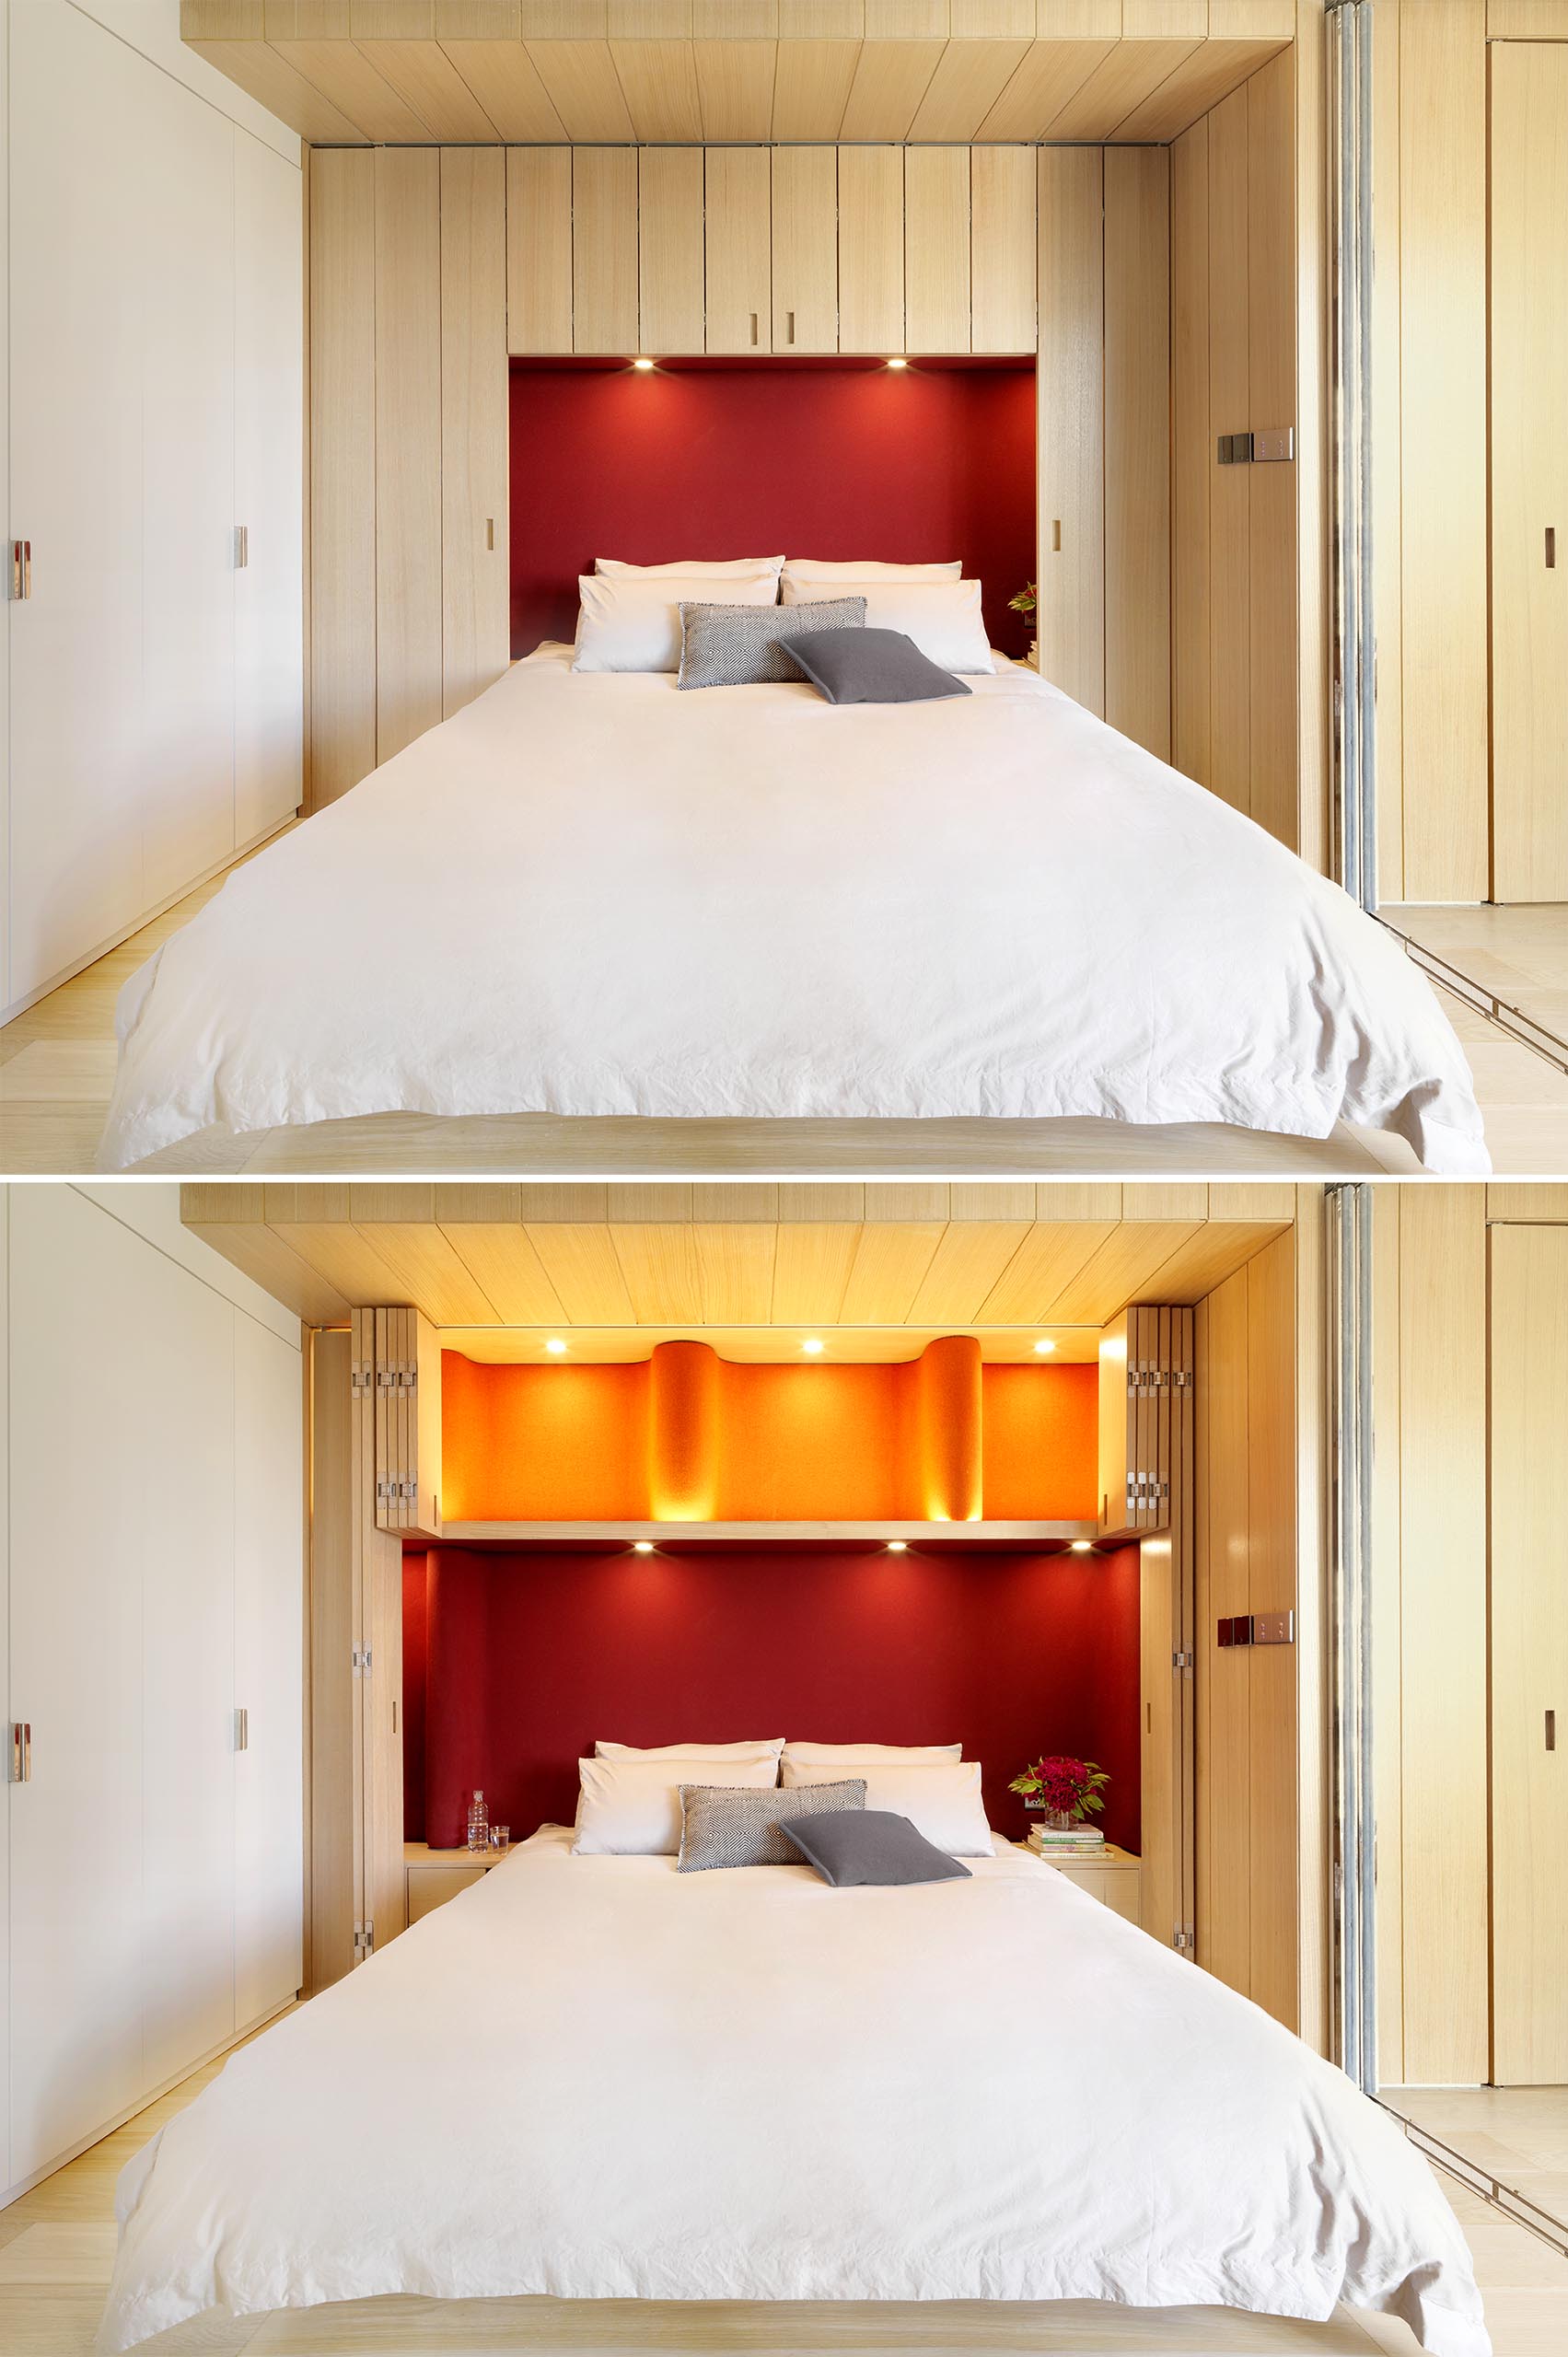 Storage is hidden within cabinets that surround this bed and the red headboard.